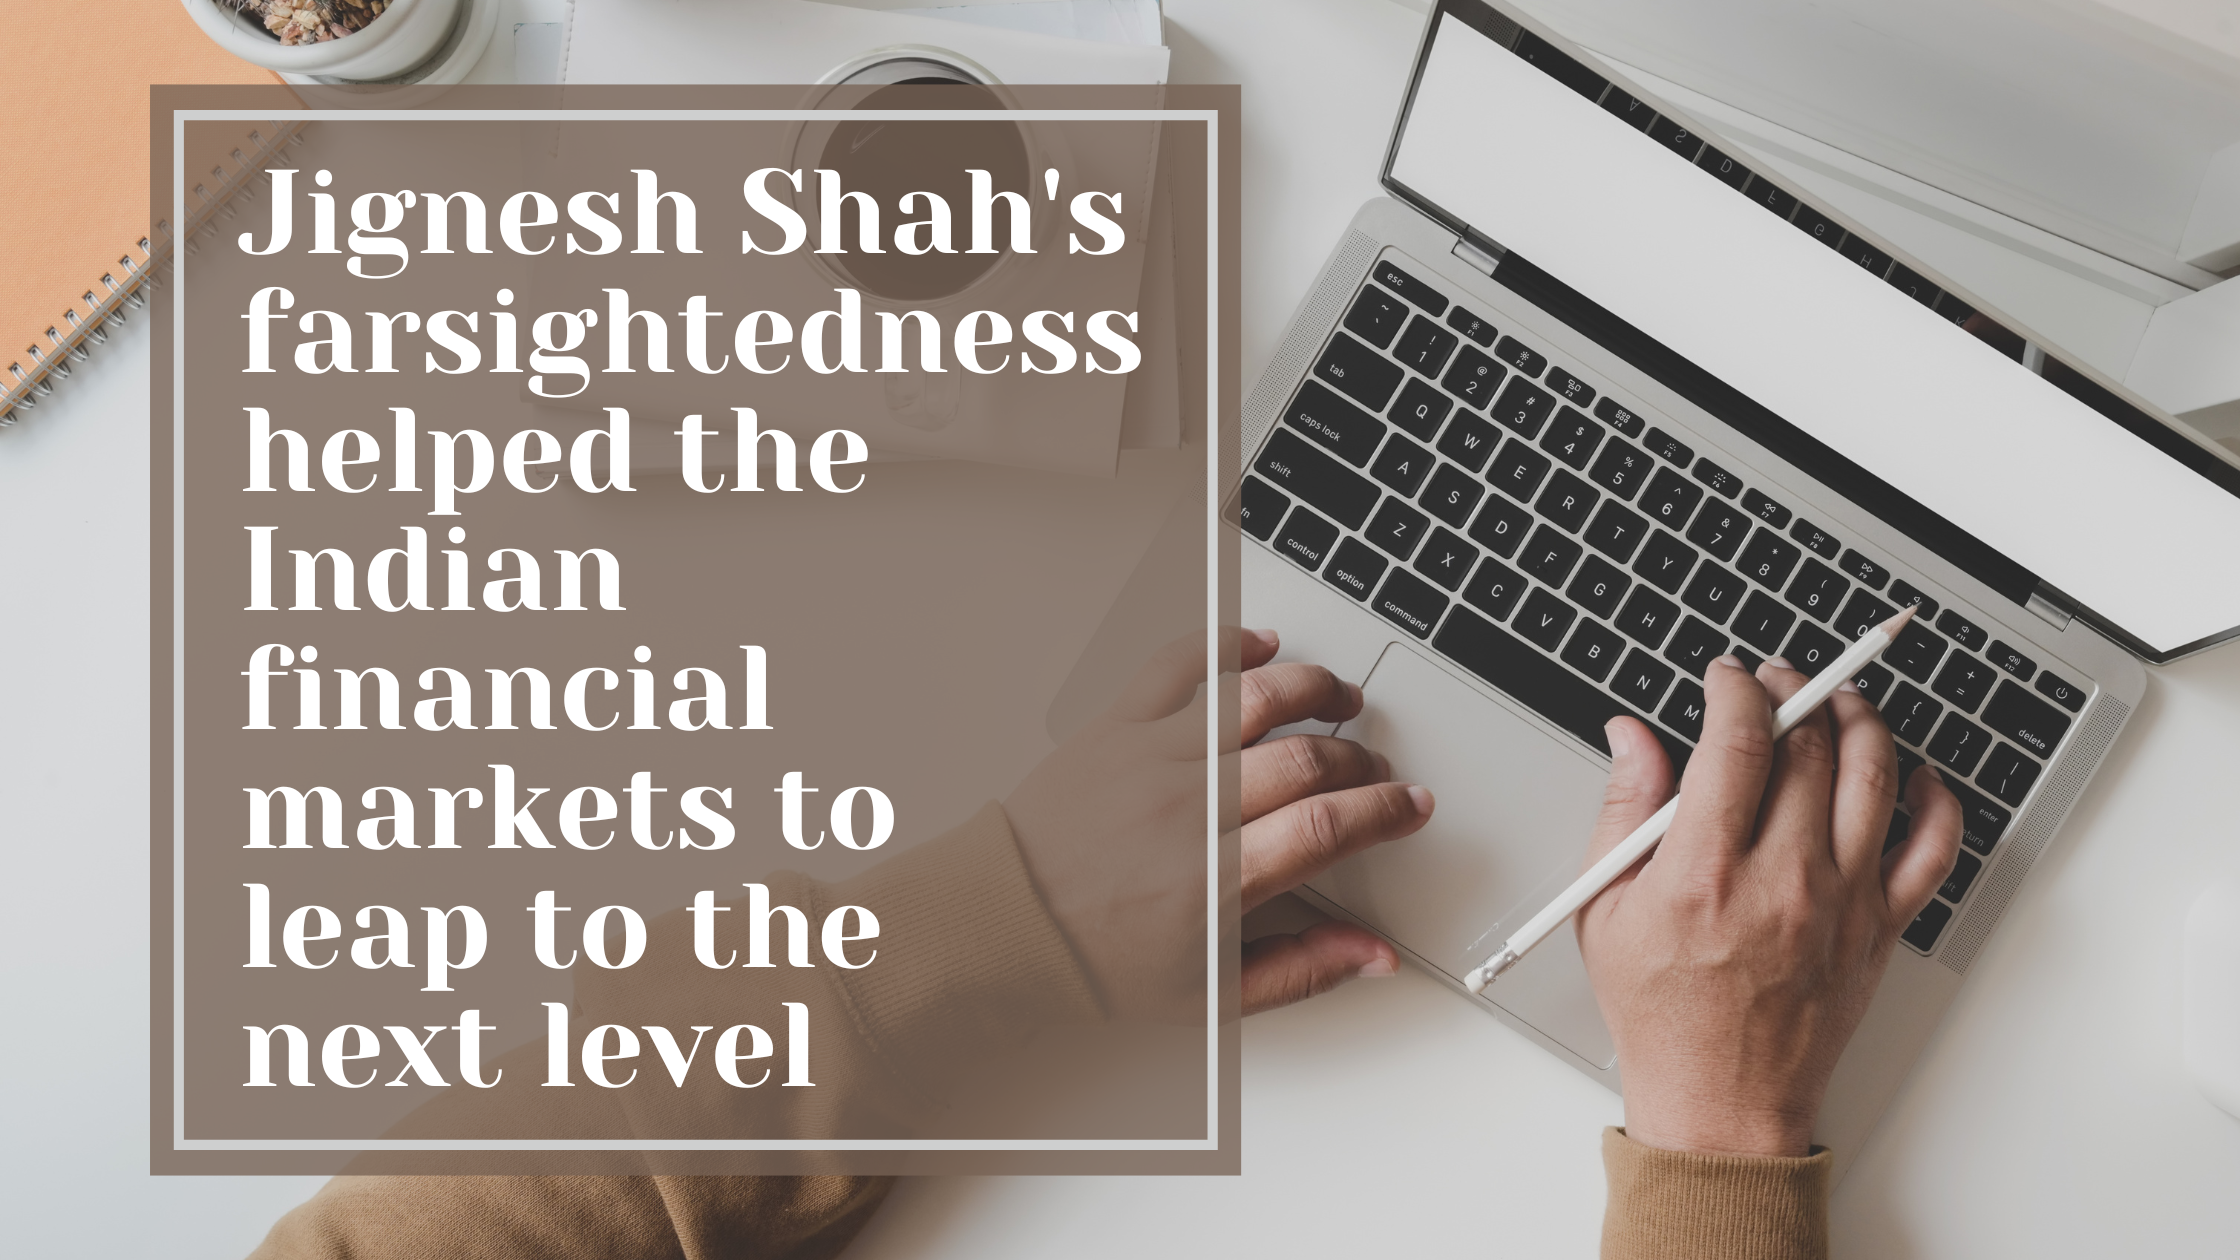 Jignesh Shah’s farsightedness helped the Indian financial markets to leap to the next level